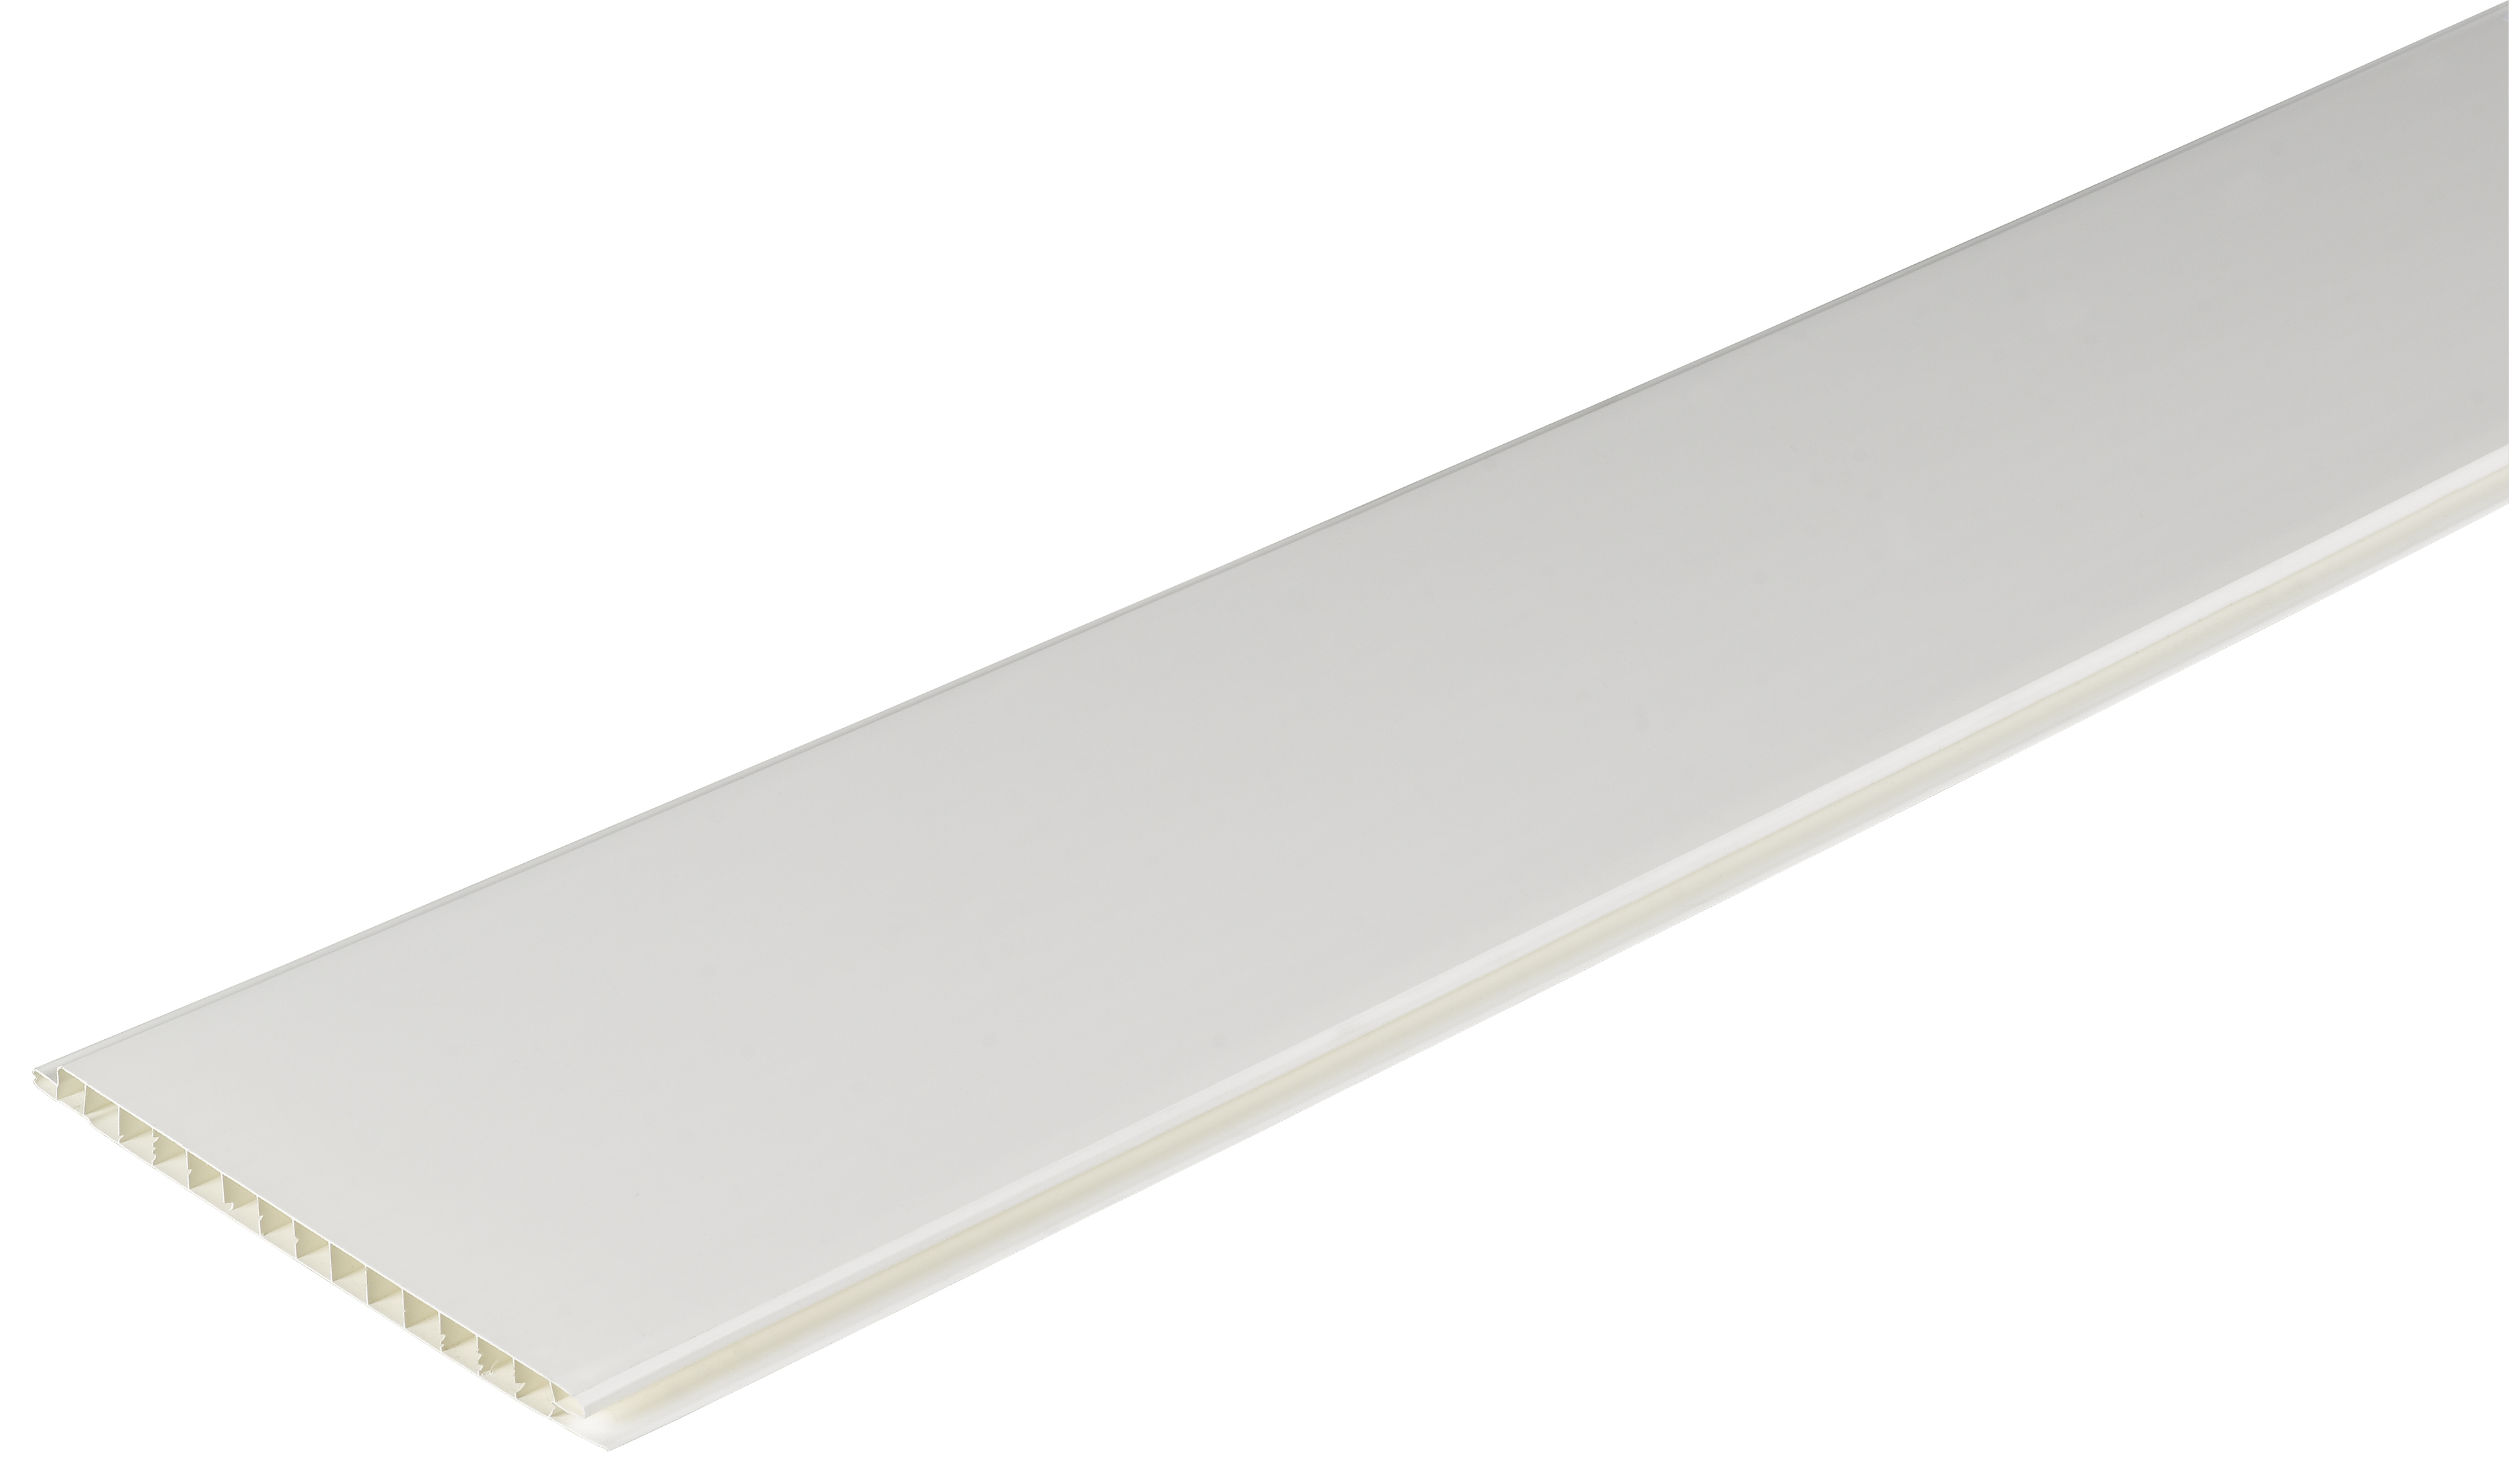 Image of Wickes PVCu Interior Cladding - White 167mm x 2.5m Pack of 6